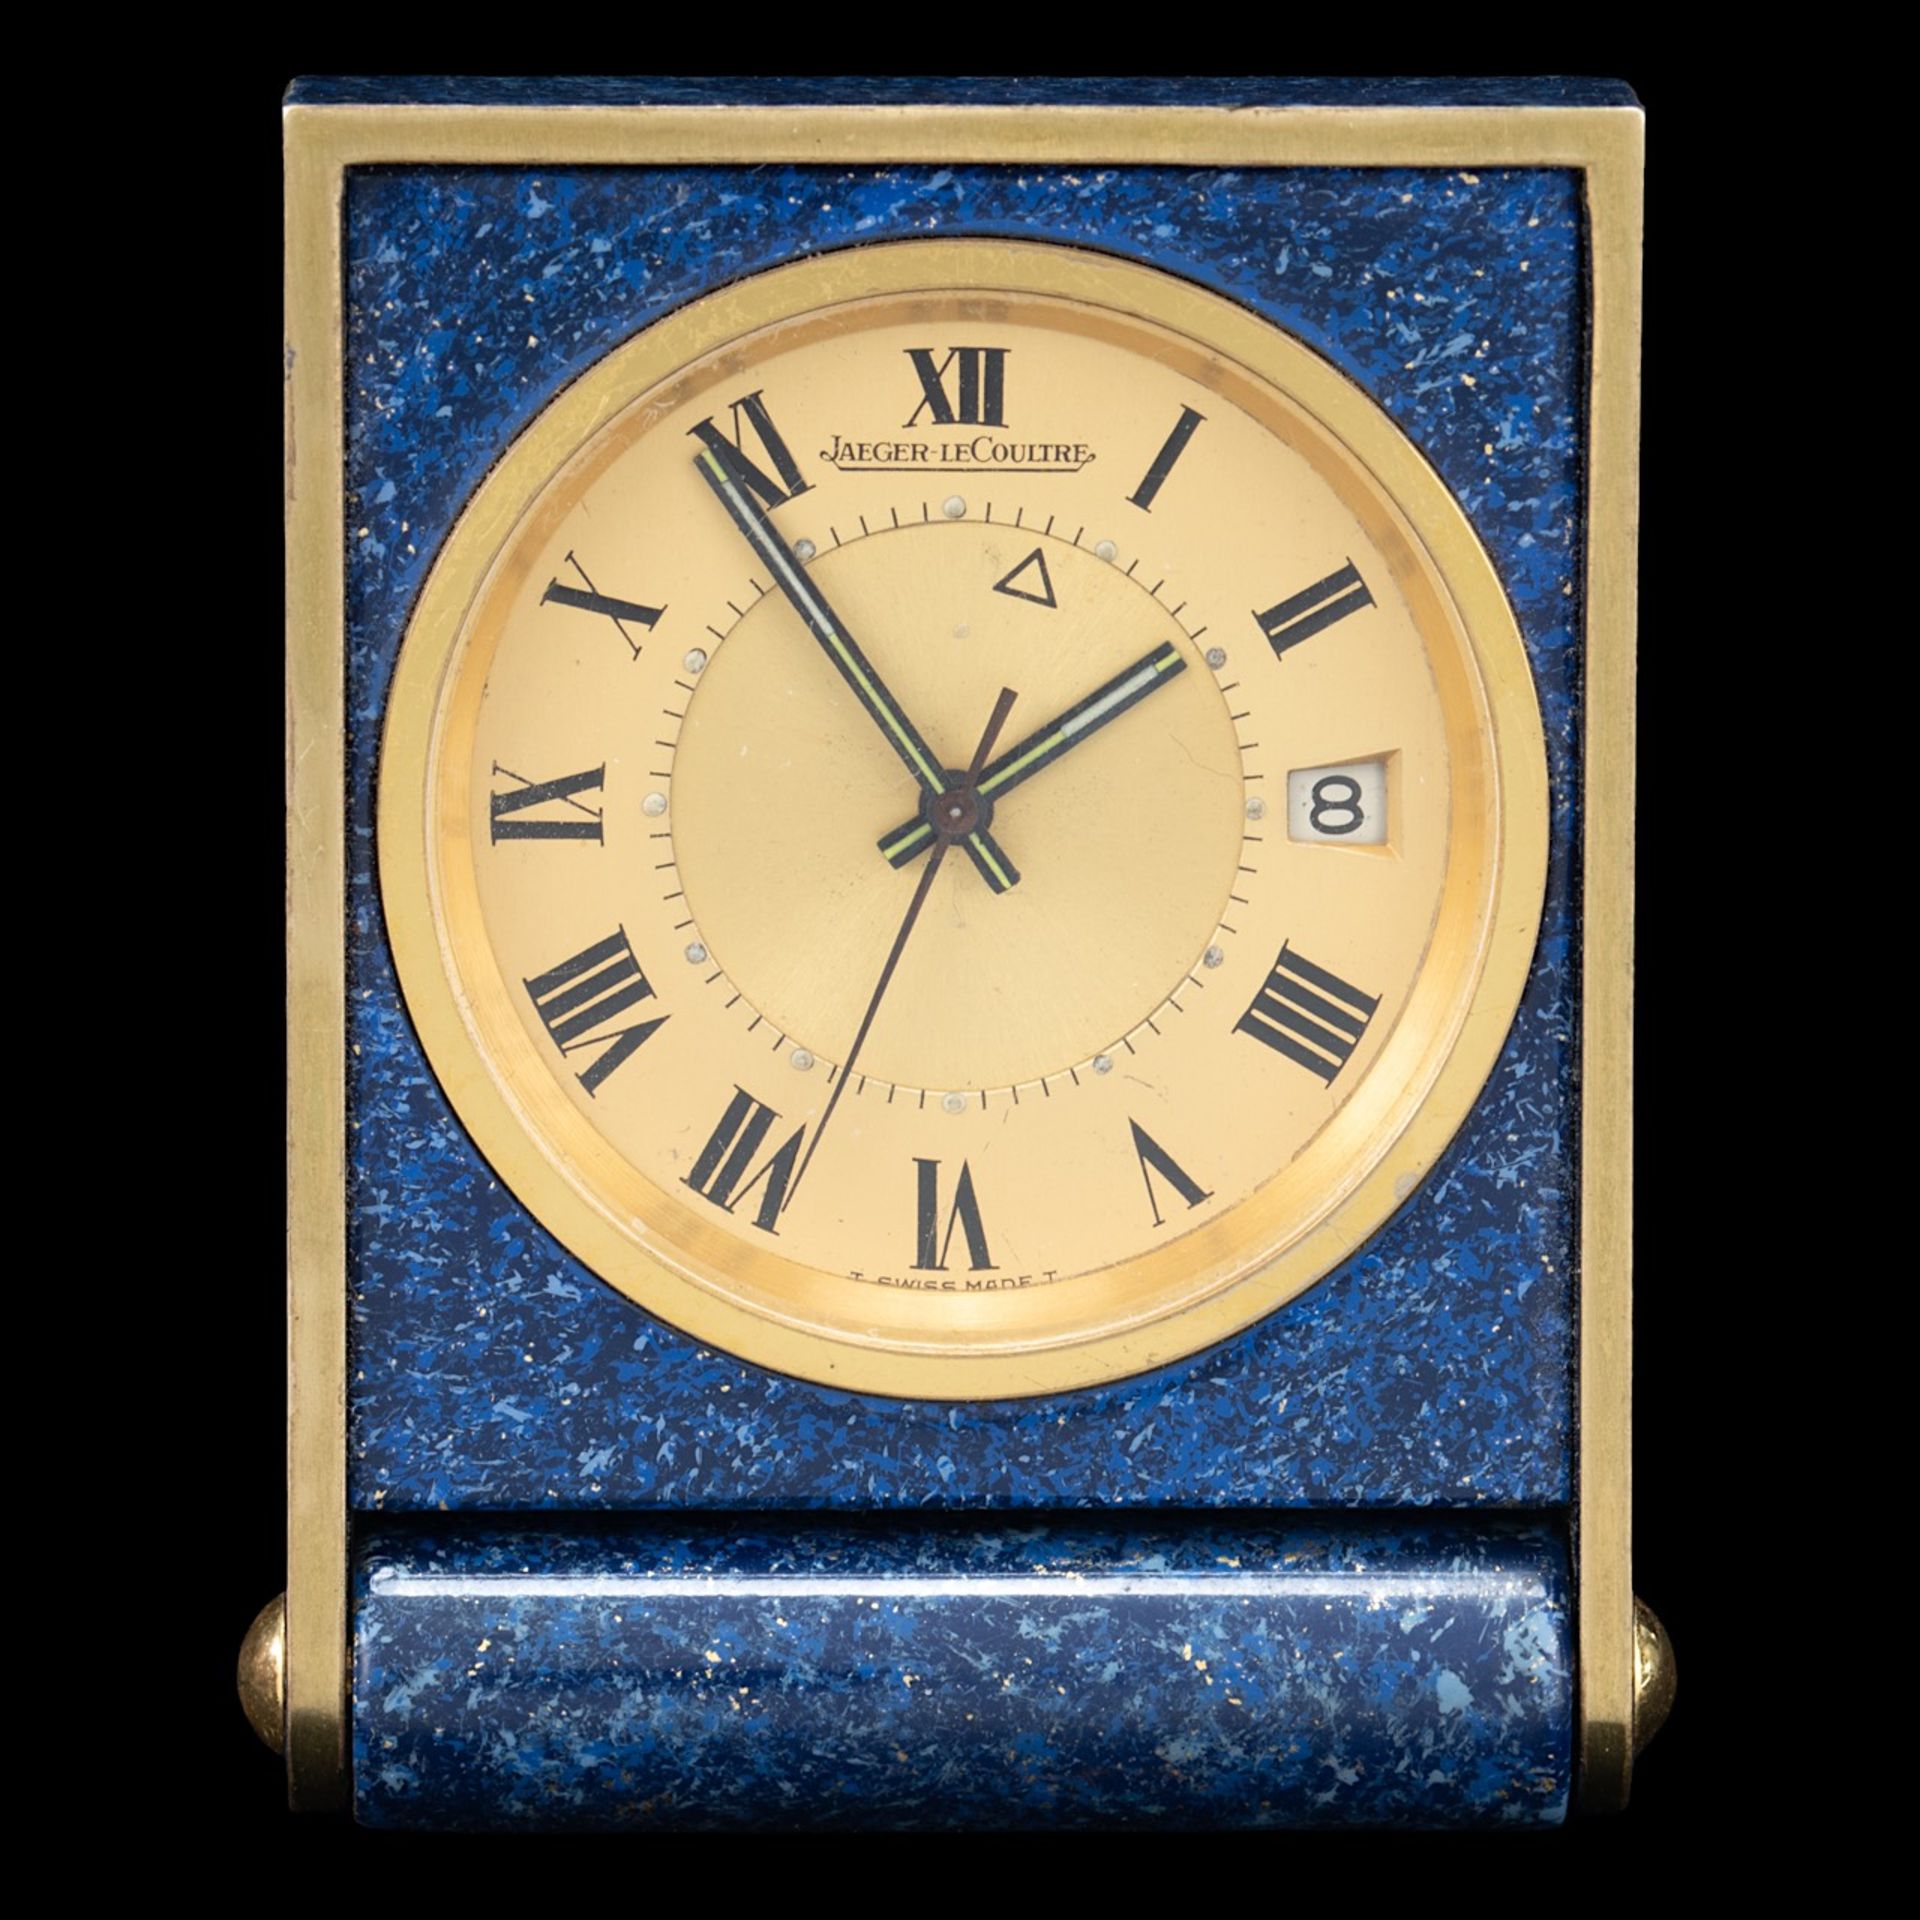 A Jaeger-LeCoultre folding travel alarm clock, W 4,3 - H 5,2 - total thickness 1,3 cm